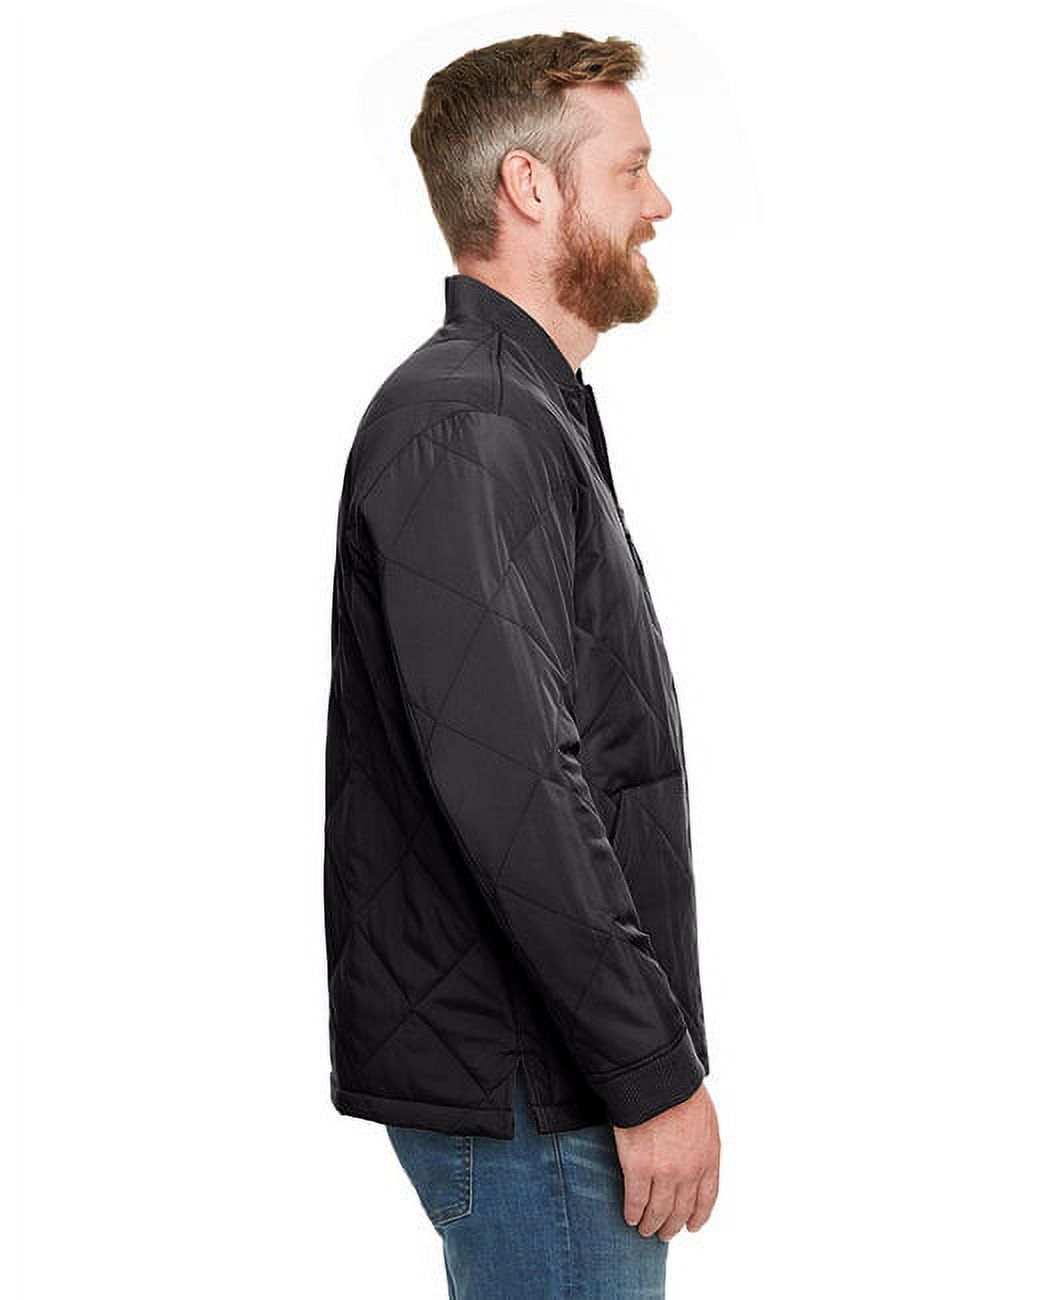 Adult Dockside Insulated Utility Jacket - DARK CHARCOAL - S - image 3 of 3